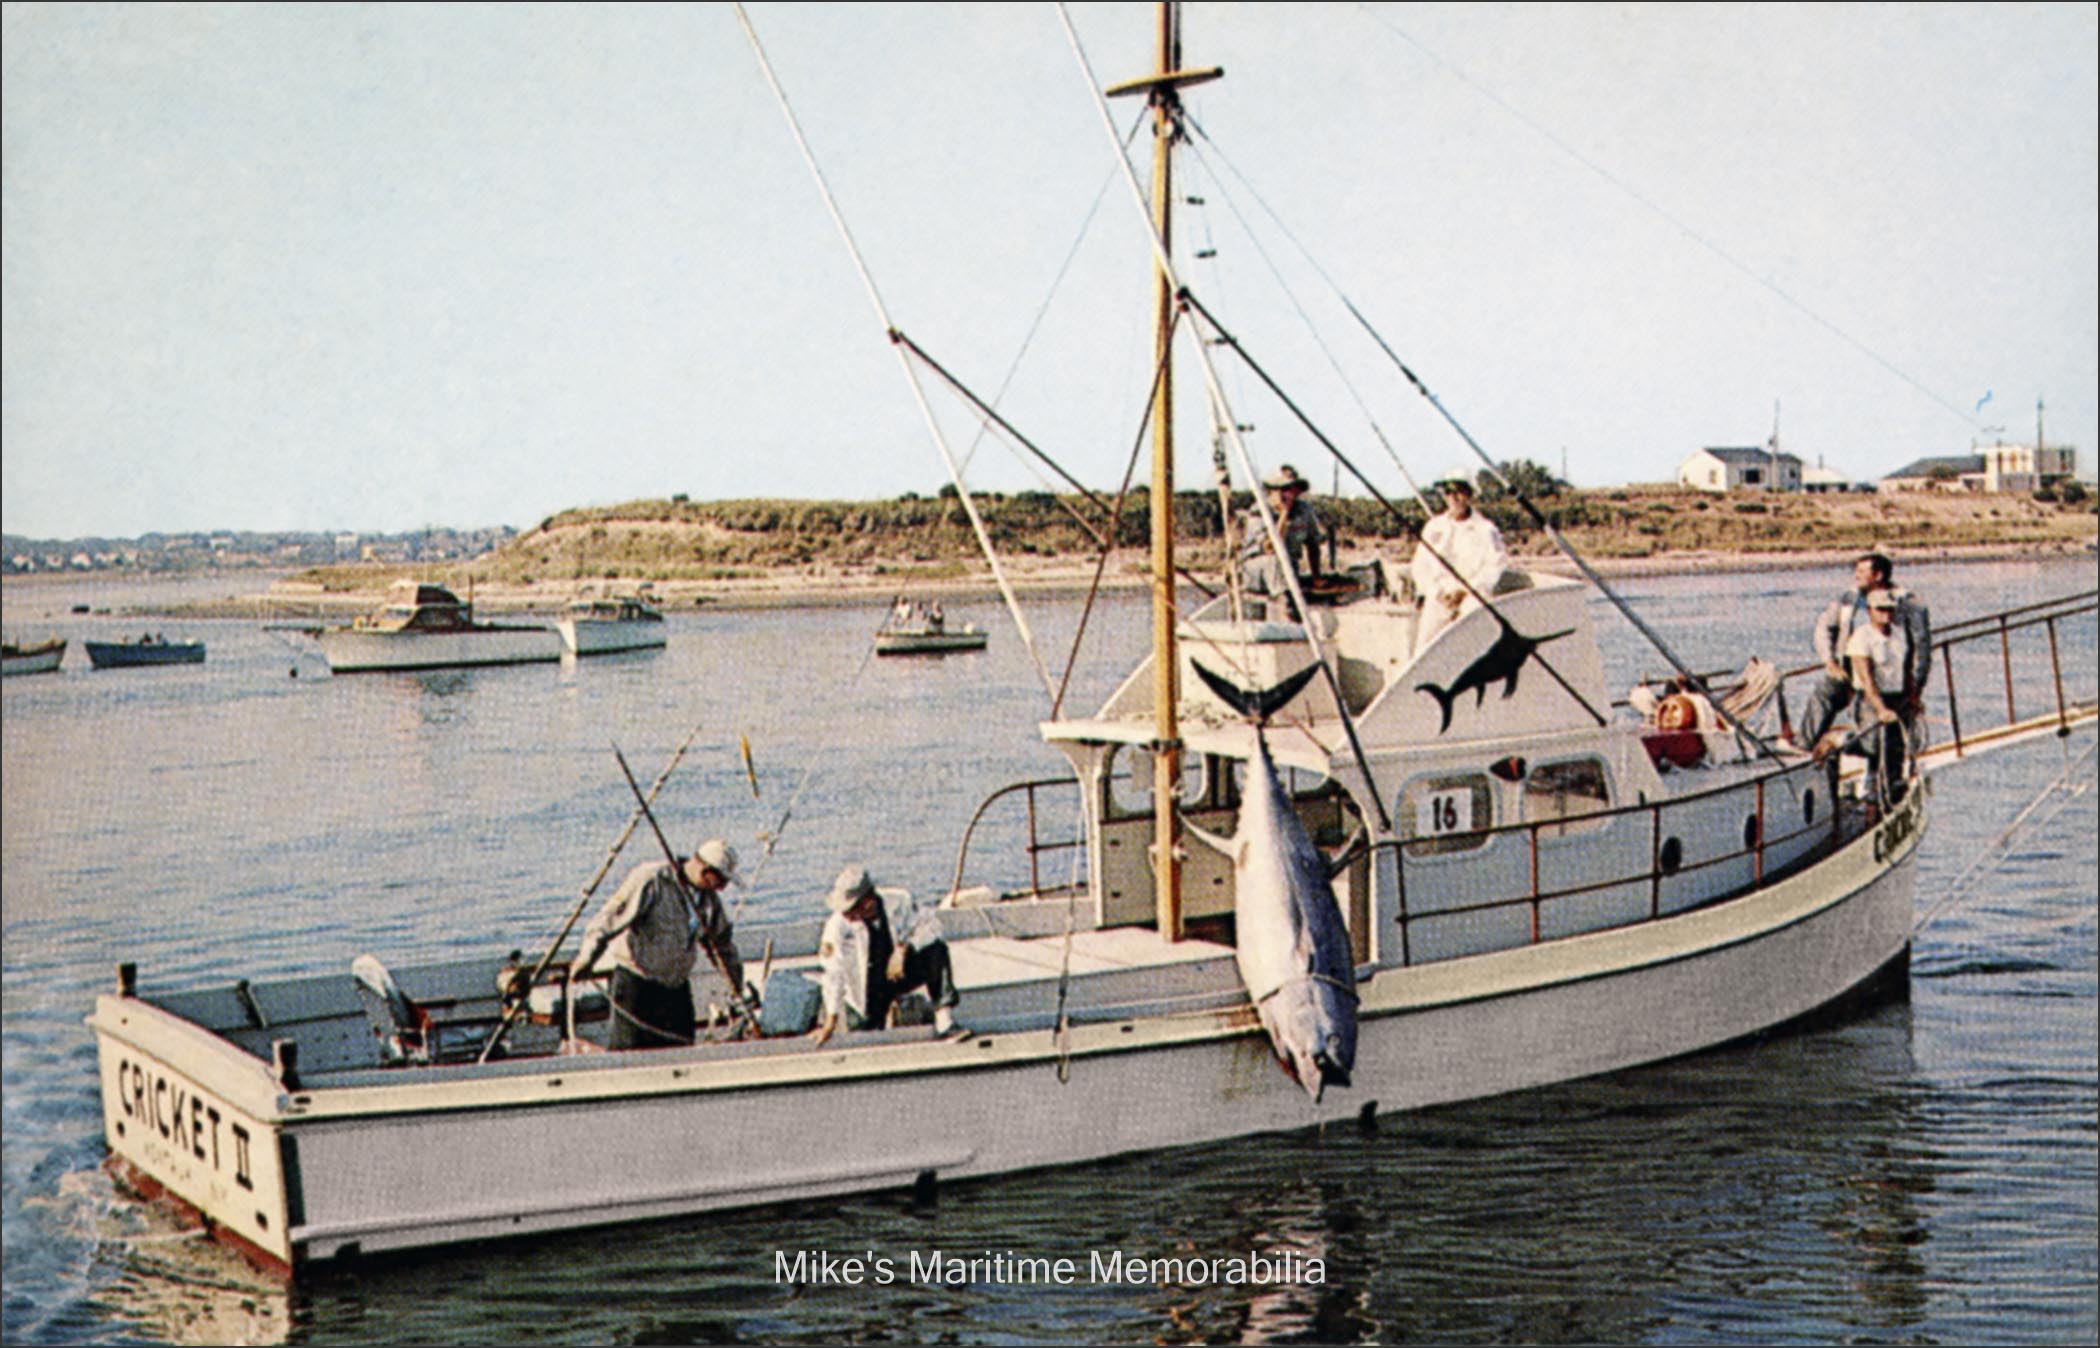 CRICKET II, Montauk, NY – 1966 Captain Frank Mundus' "CRICKET II" from Montauk, NY circa 1966. The "CRICKET II" was The boat was built in 1947 and launched in 1948 by Chesapeake bayman Tiffany Cockrell at the Glebe Point Motor Boat Co. in Burgess Store, VA. Captain Mundus originally sailed the "CRICKET II" from Brielle, NJ before relocating to Montauk, NY in July of 1951. Although this photo depicts a large tuna on the vessel's gin pole, Captain Mundus was one of the most famous shark fishermen of his time. The character 'Quint' in the 1975 Steven Spielberg movie 'Jaws' was based on the real life of Captain Mundus. He was indeed the godfather of 'Jaws'. The photo is courtesy of Captain John Bogan Jr.